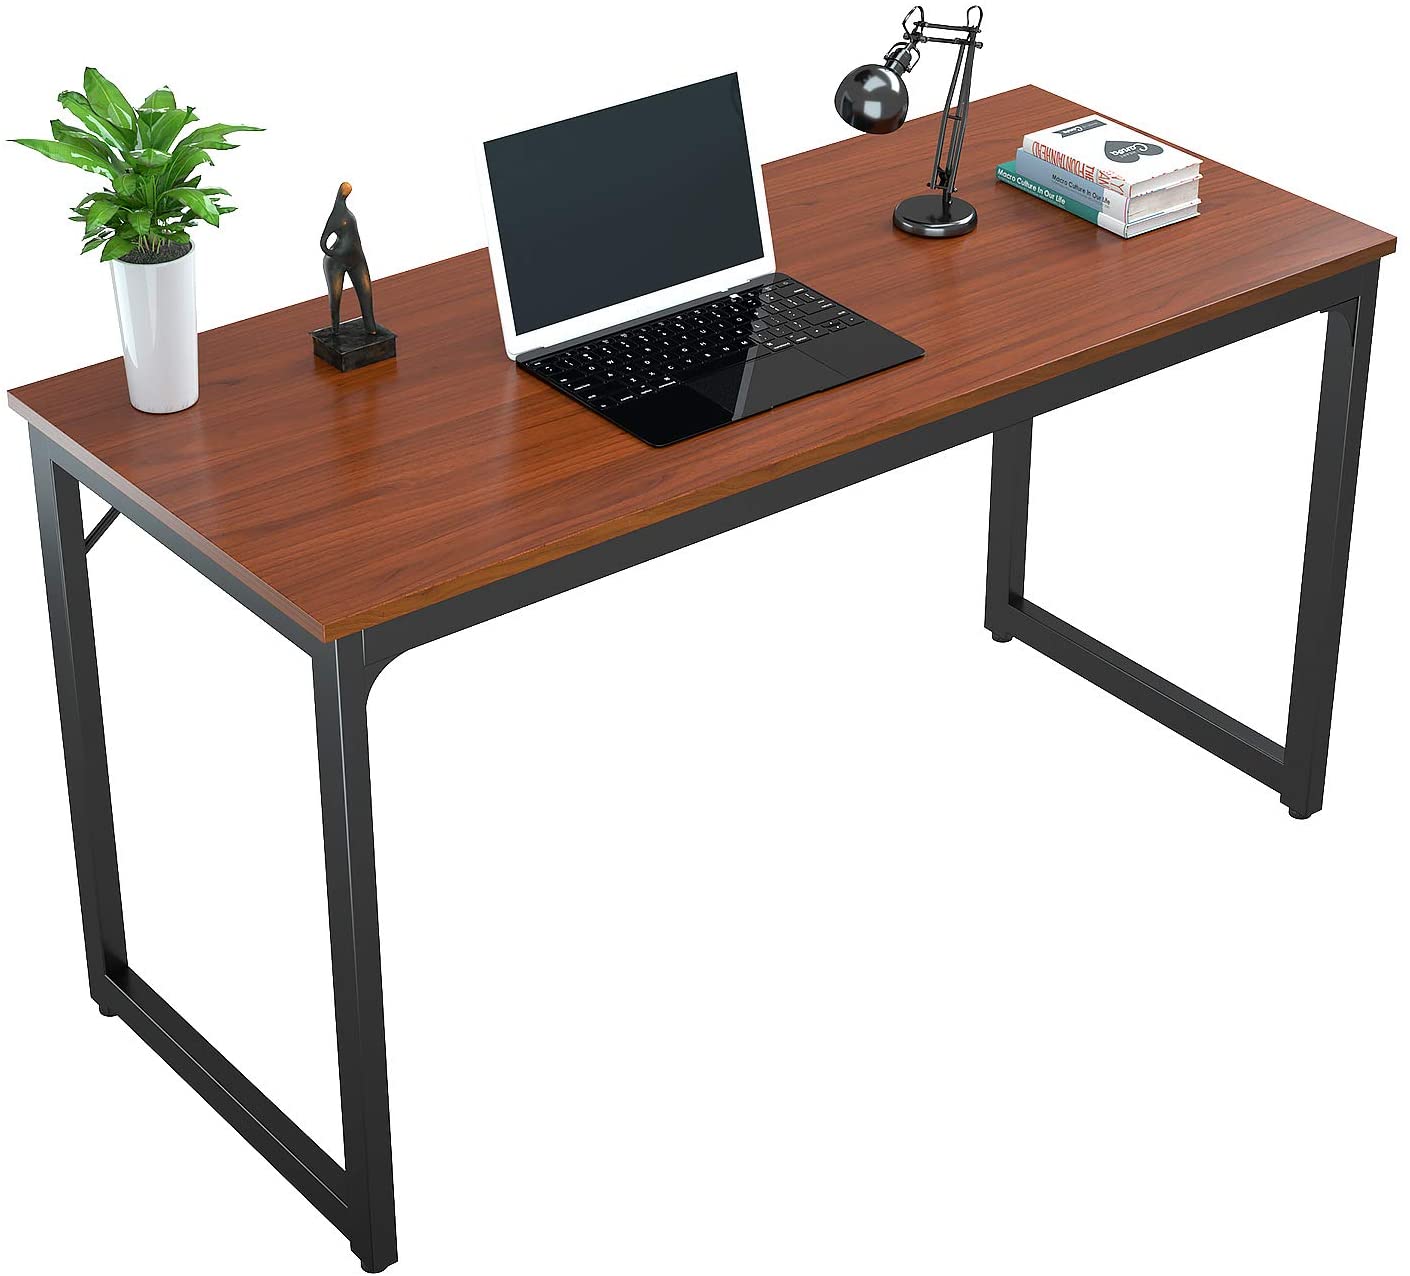 Foxemart Computer Desk Modern Sturdy Office Desk PC Laptop Notebook Study Writing Table for Home Office Workstation, Teak